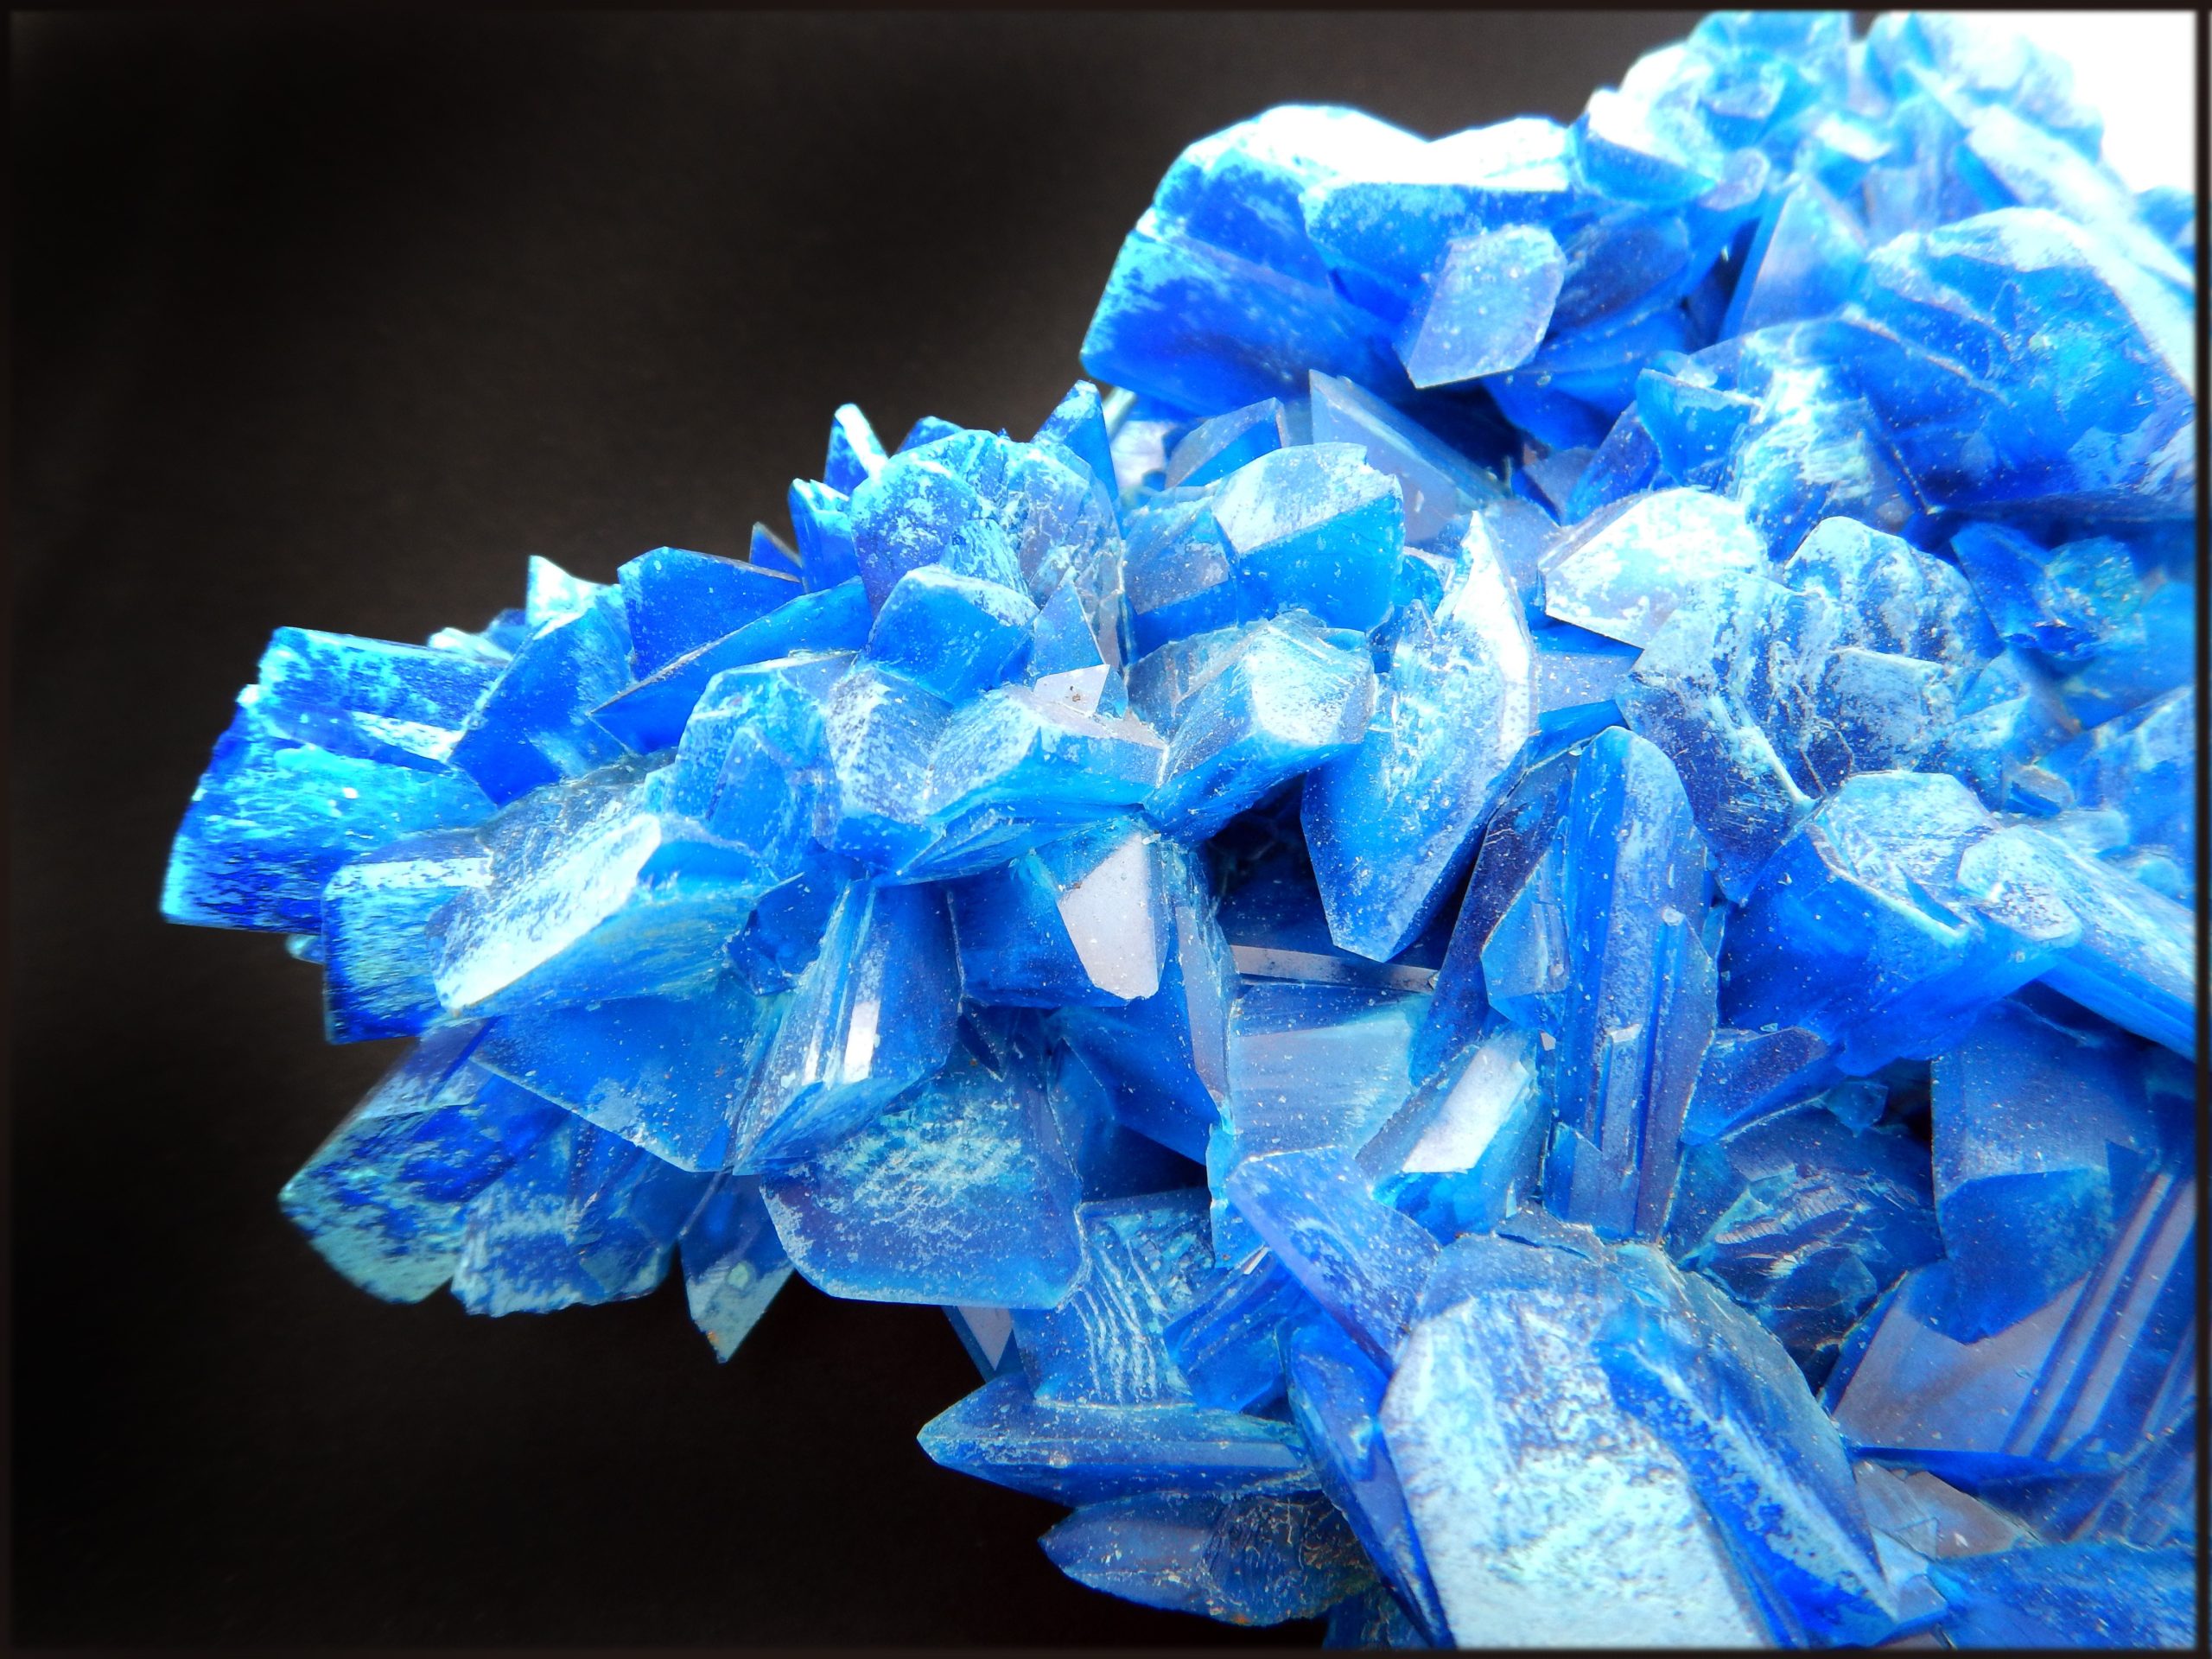 image shows royal blue solid hard crystals of copper(II) sulfate. The background colour is black.